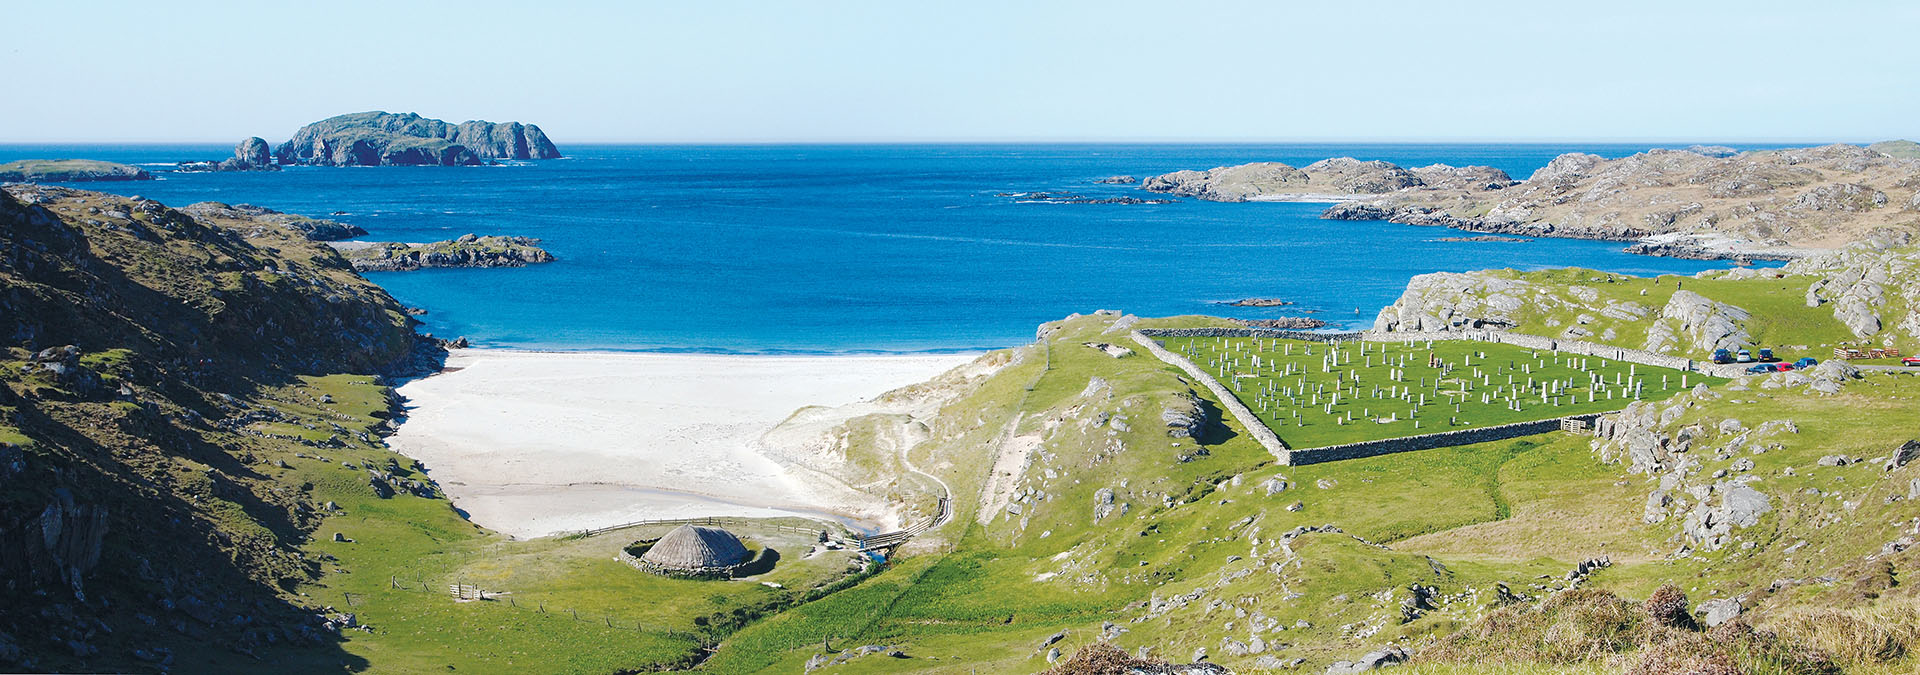 Outer Hebrides Harris Panorama